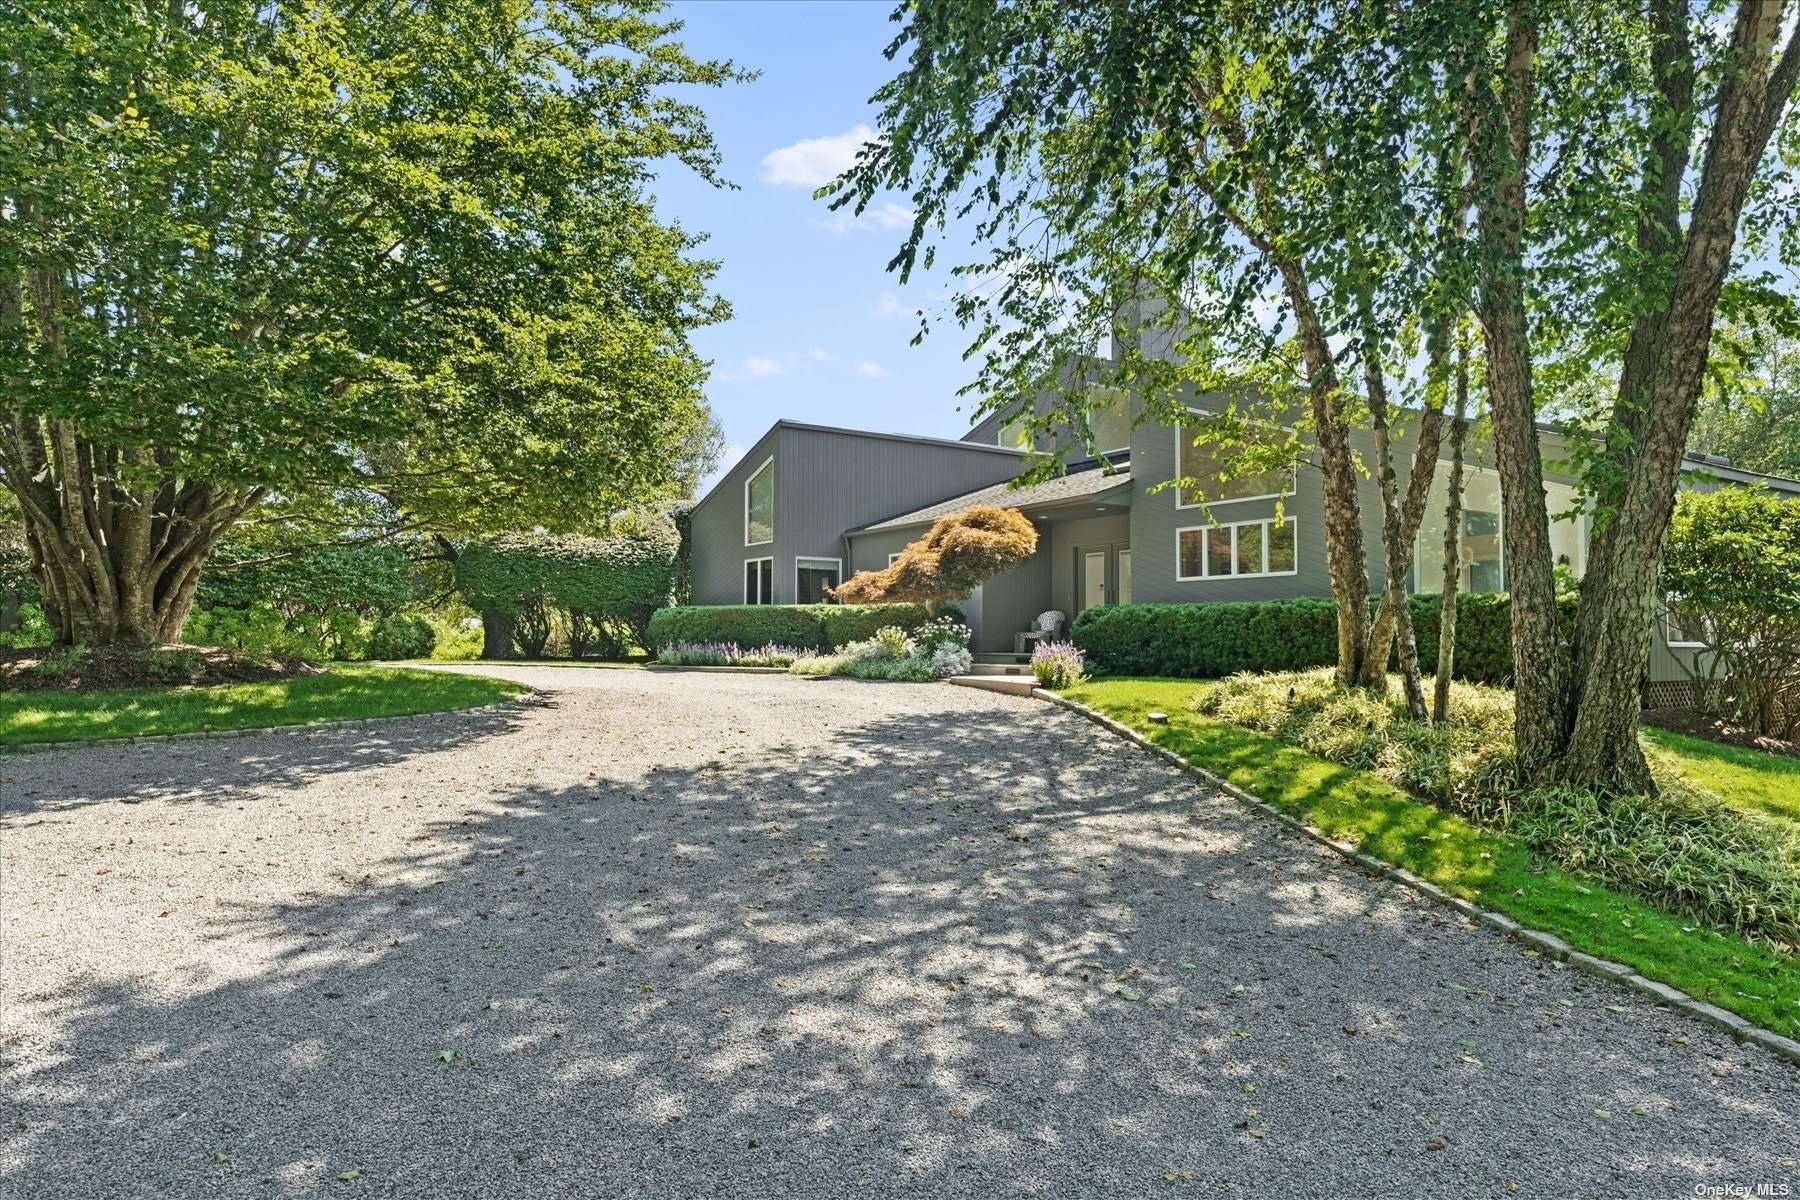 This modern Quogue oasis sits on over 2.